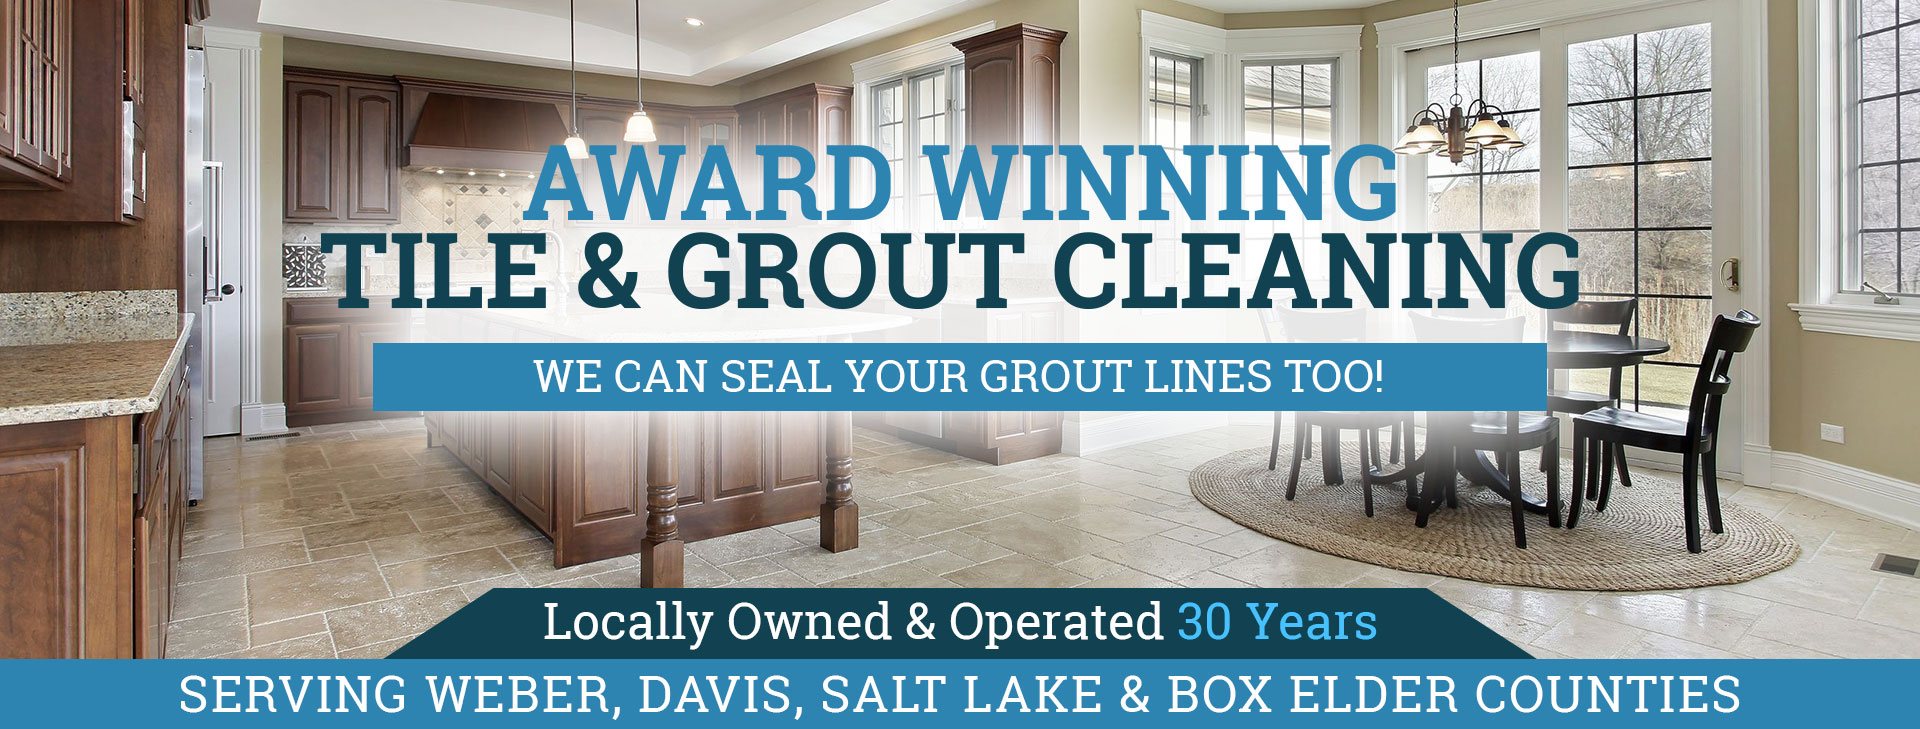 award winning tile and grout cleaning in Davis County UT